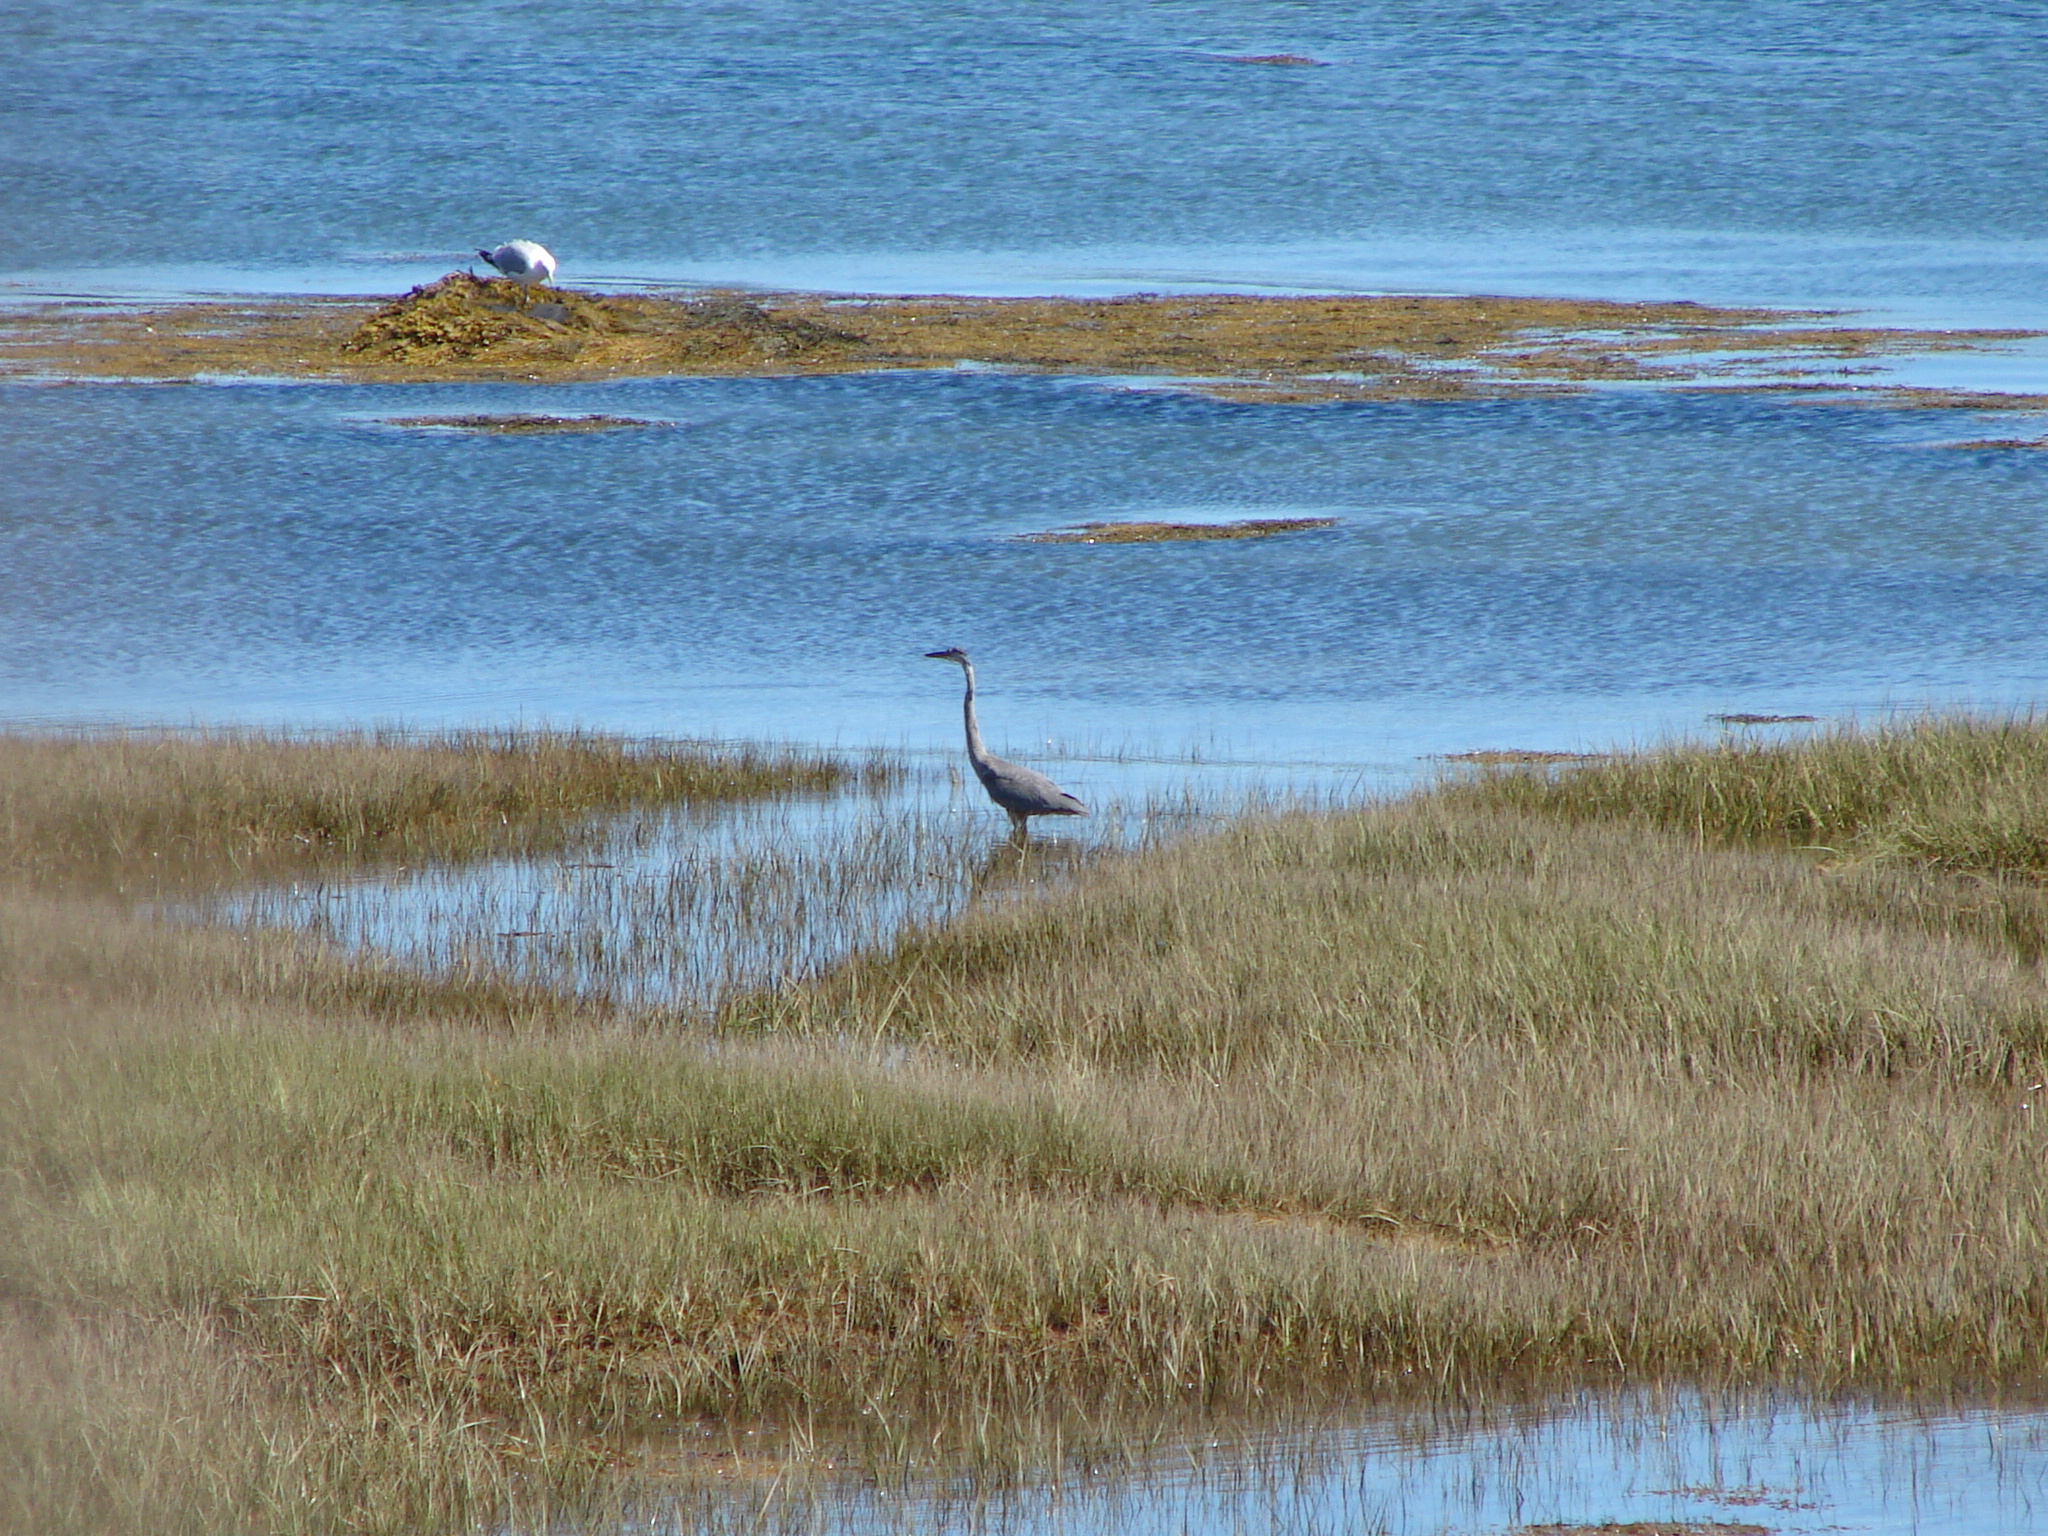 Great blue heron on the shore.